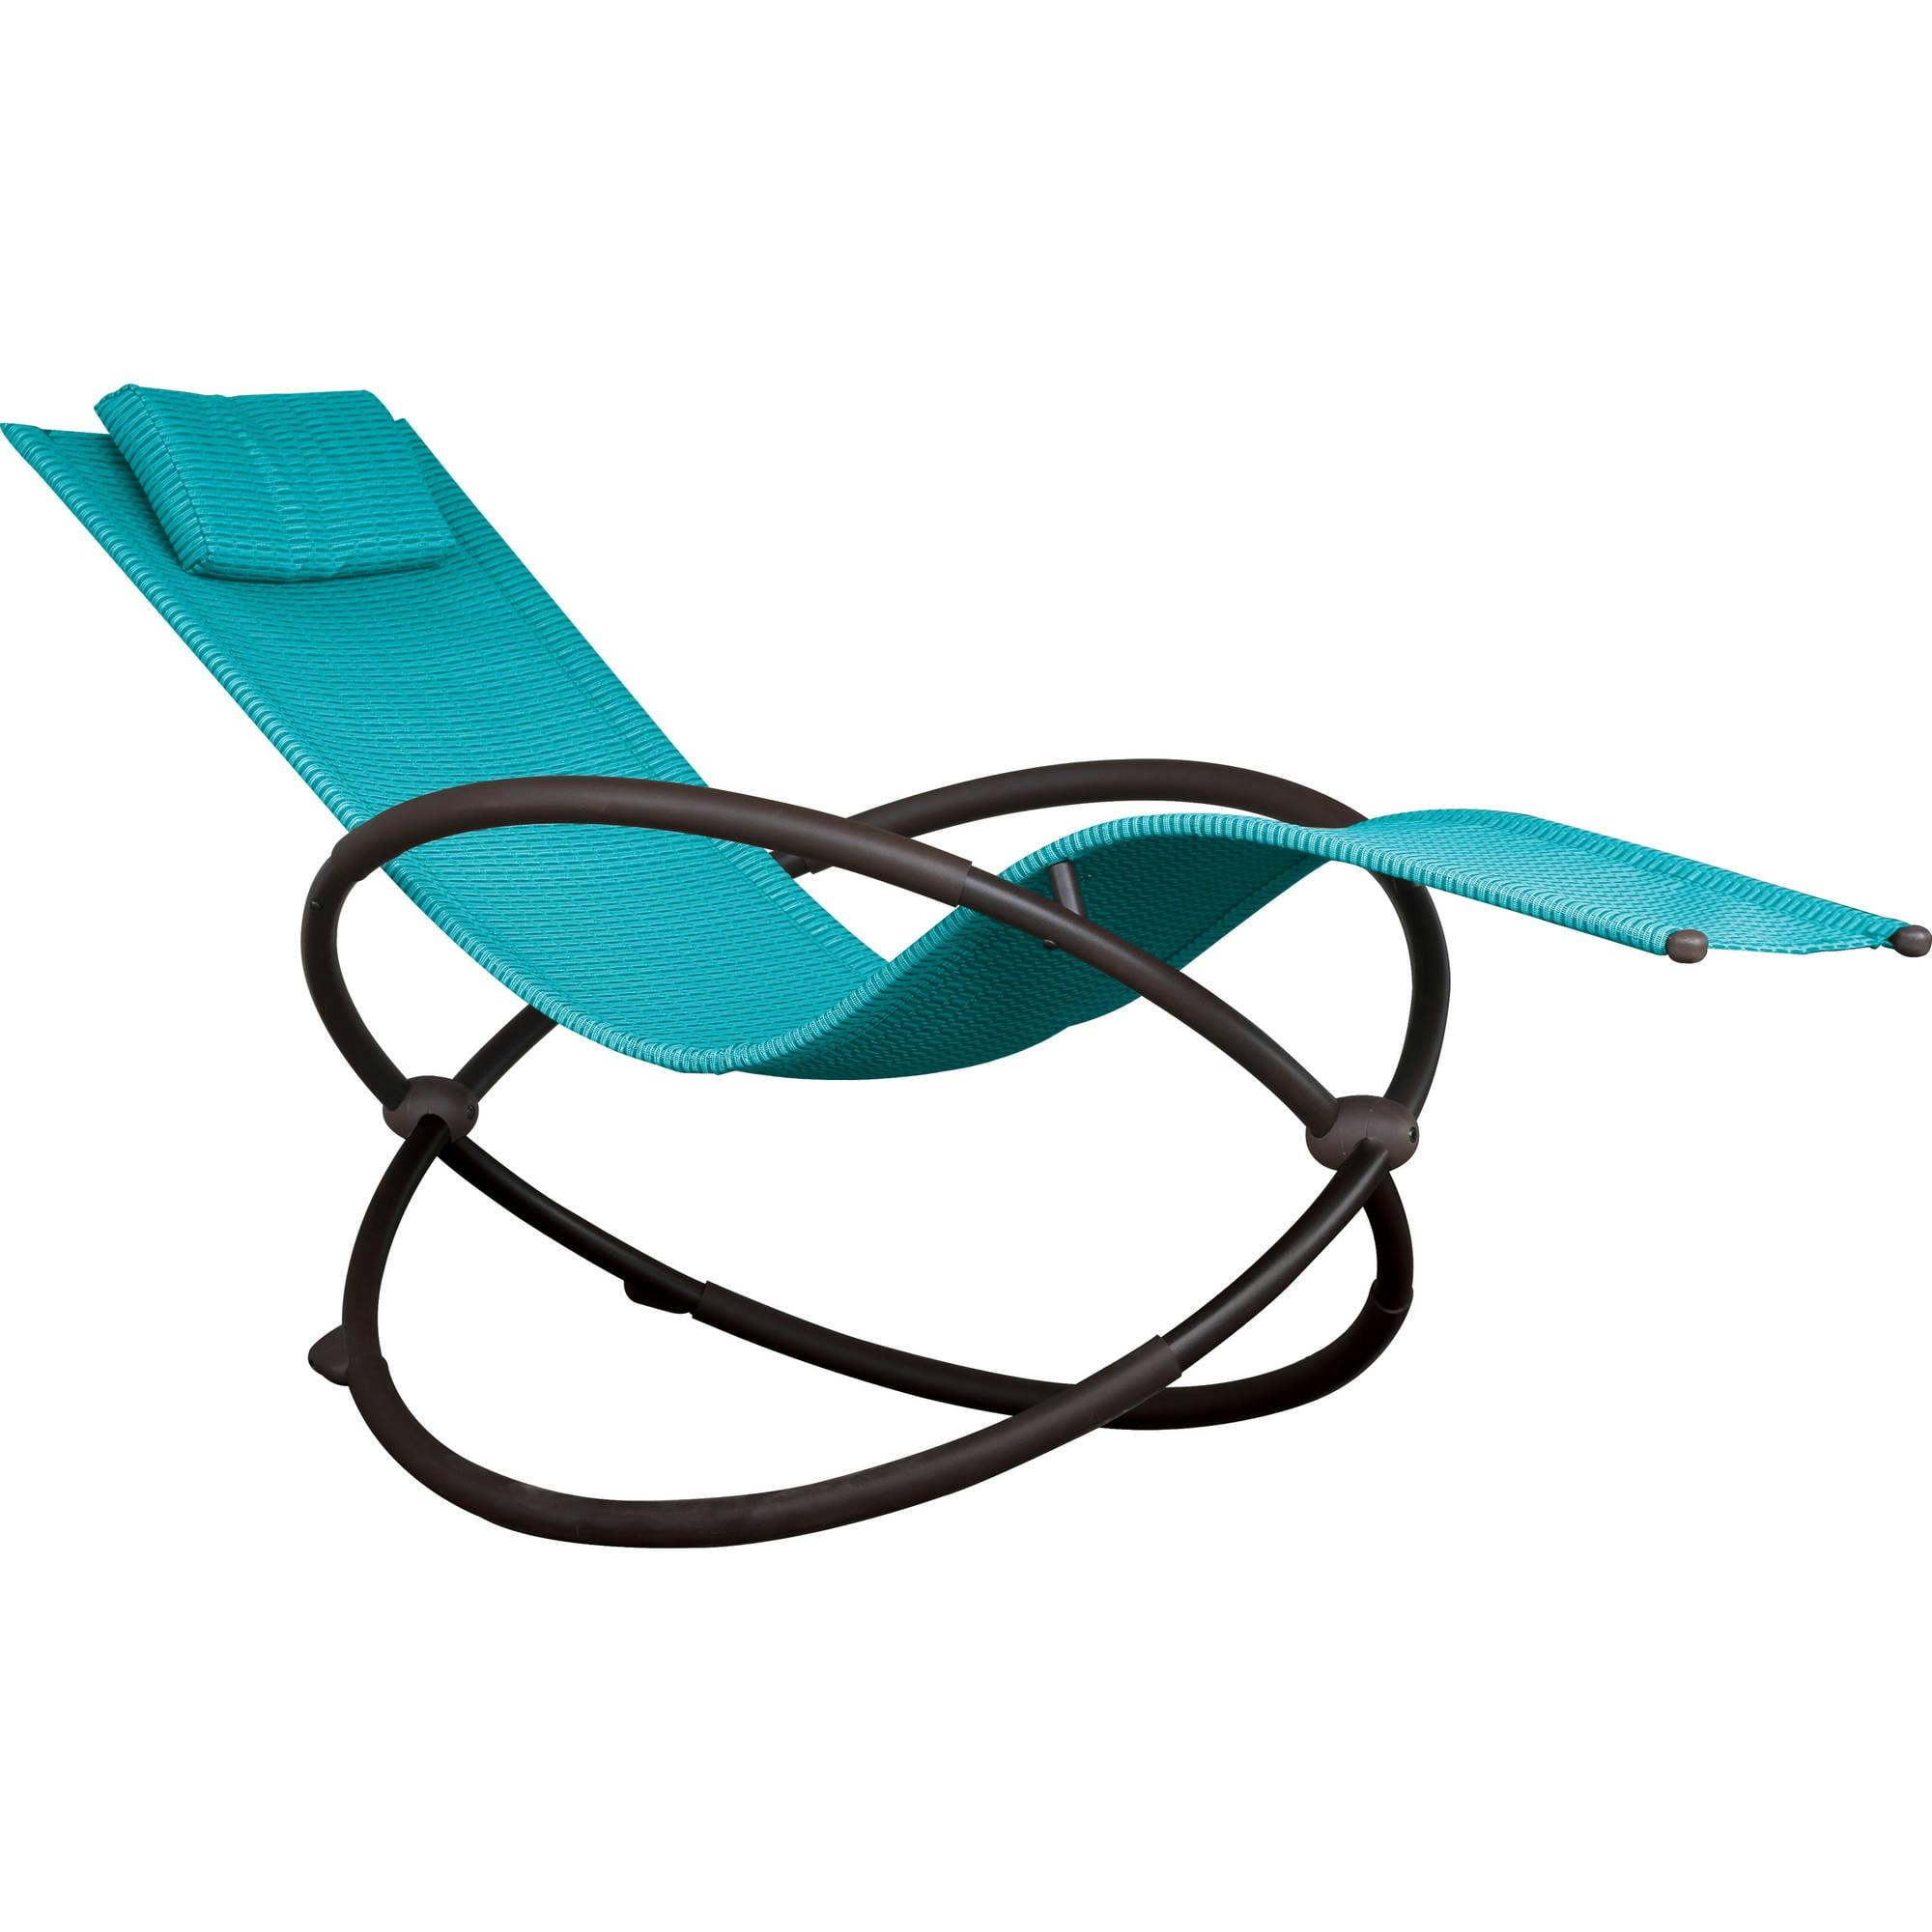 True Turquoise Orbital Lounger with Acrylic Mesh Seat